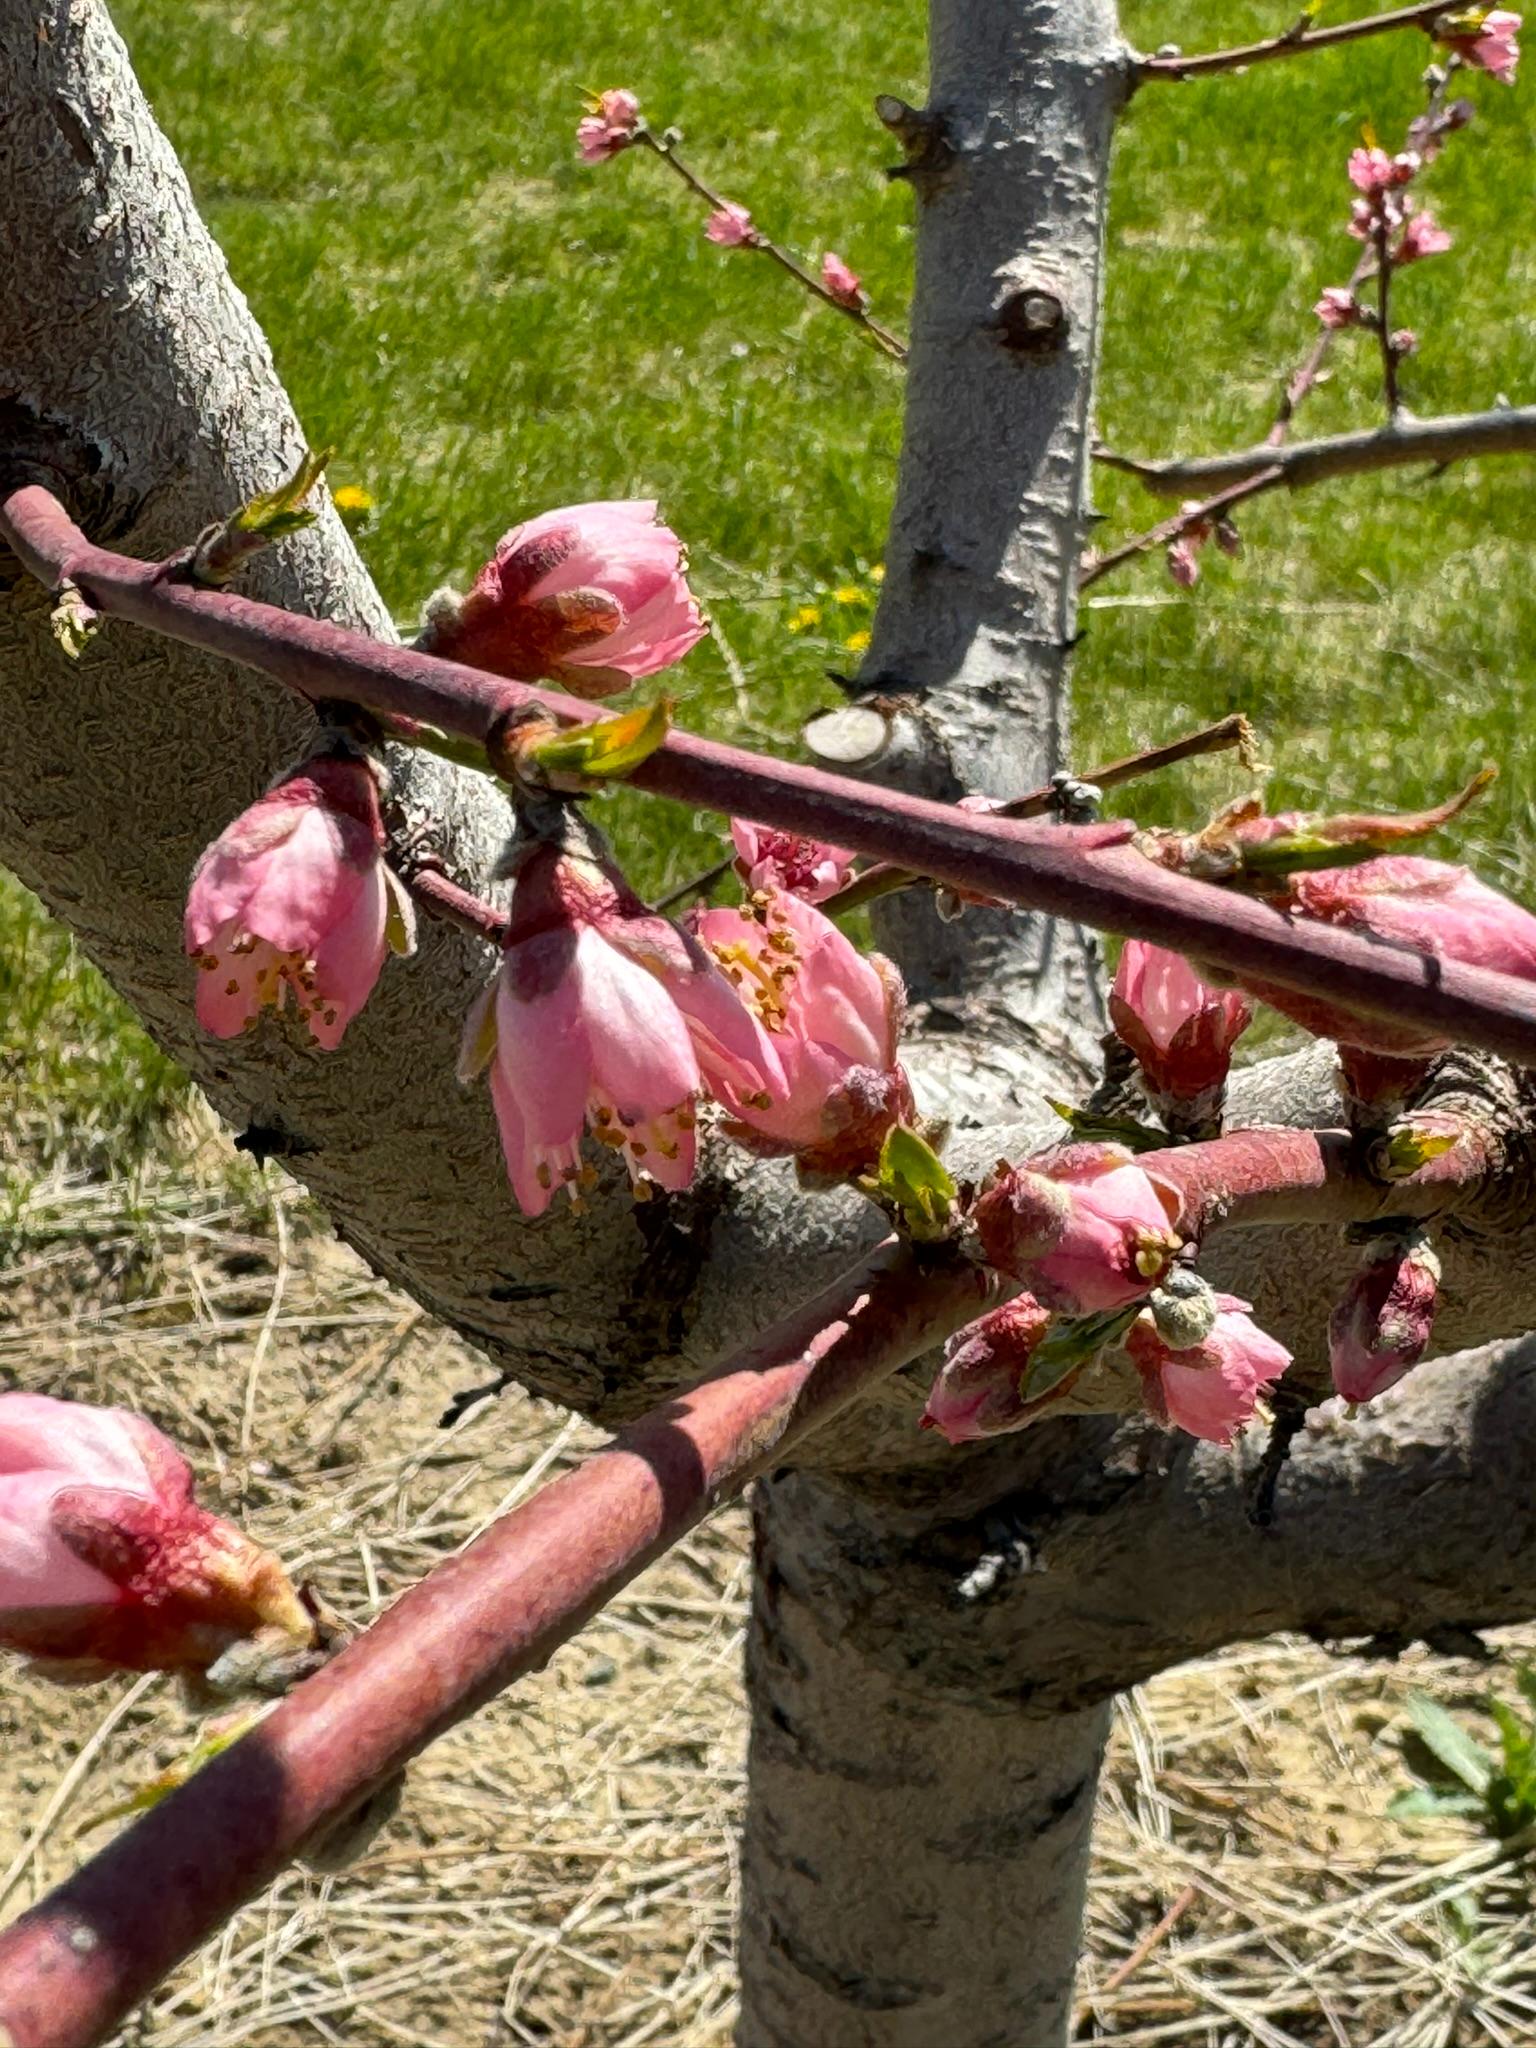 Peaches blooming.